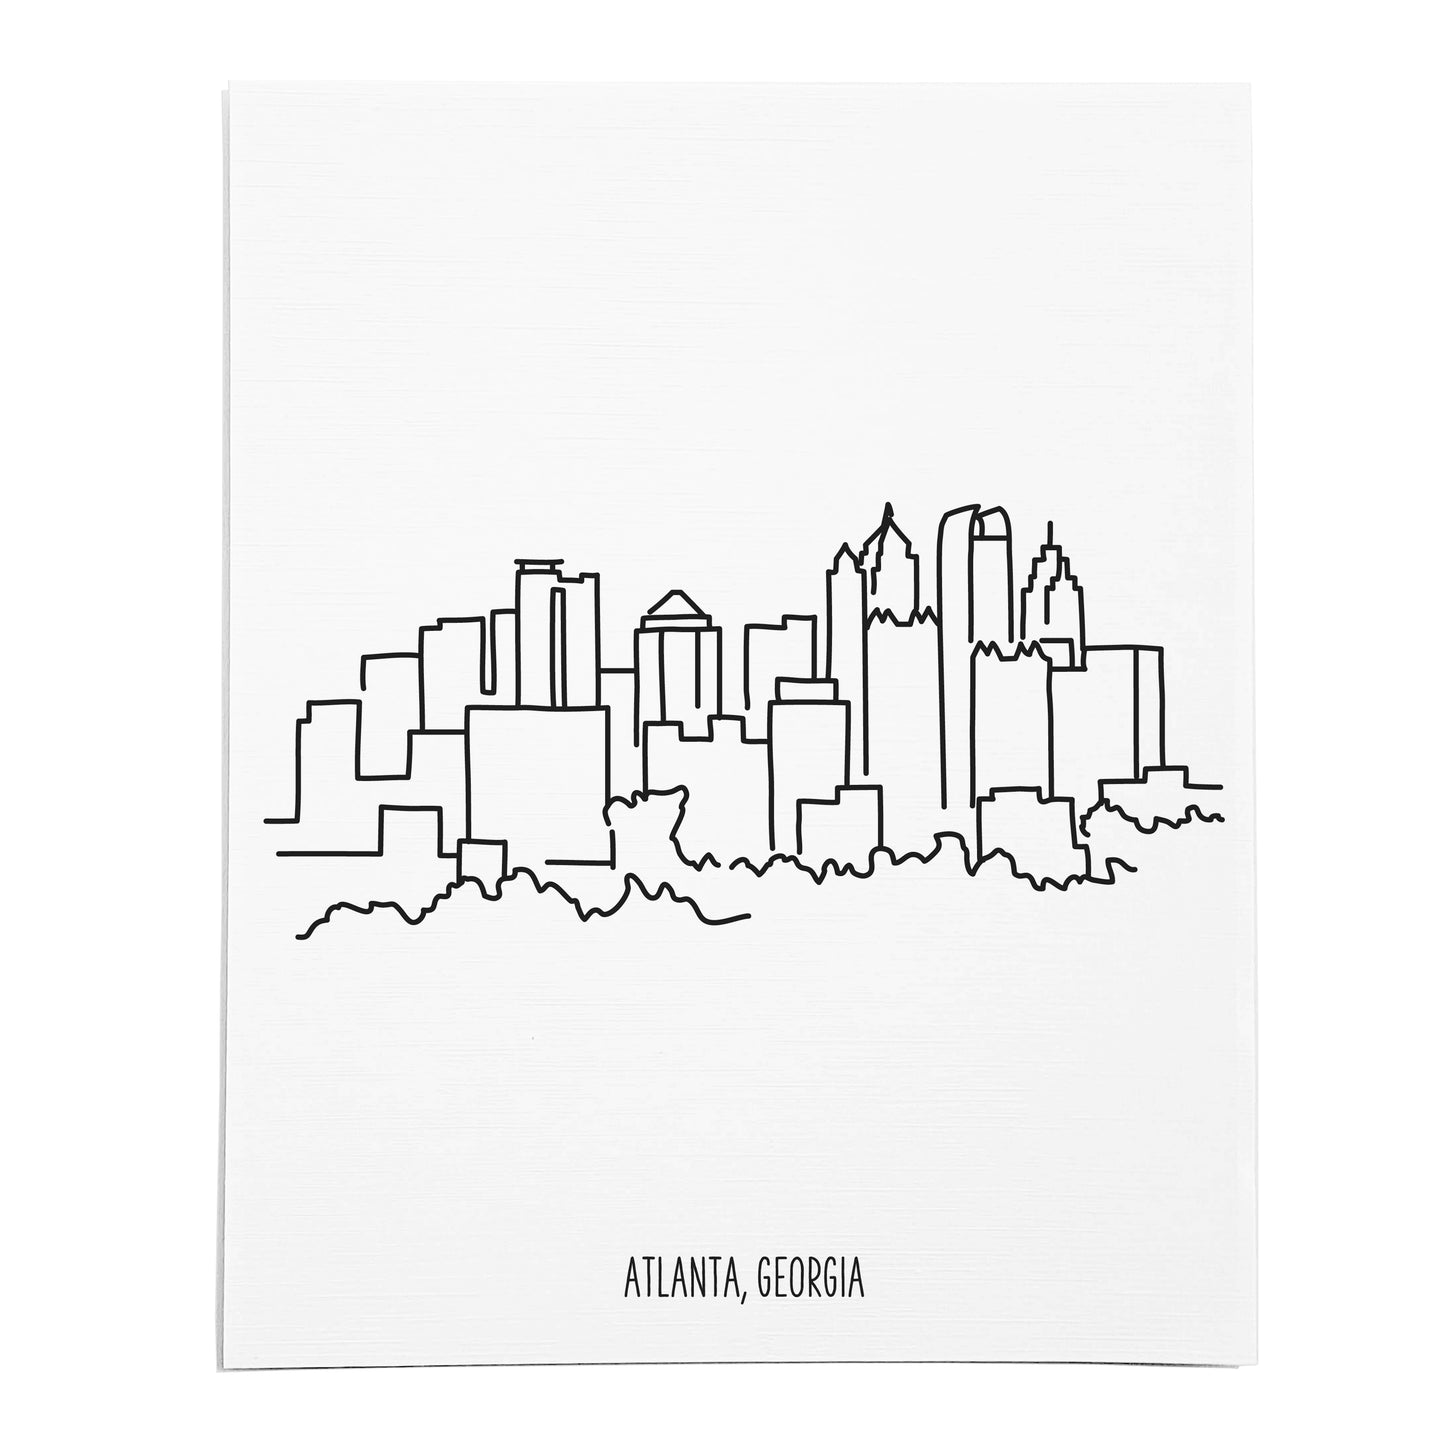 An art print featuring a line drawing of the Atlanta Skyline on white linen paper